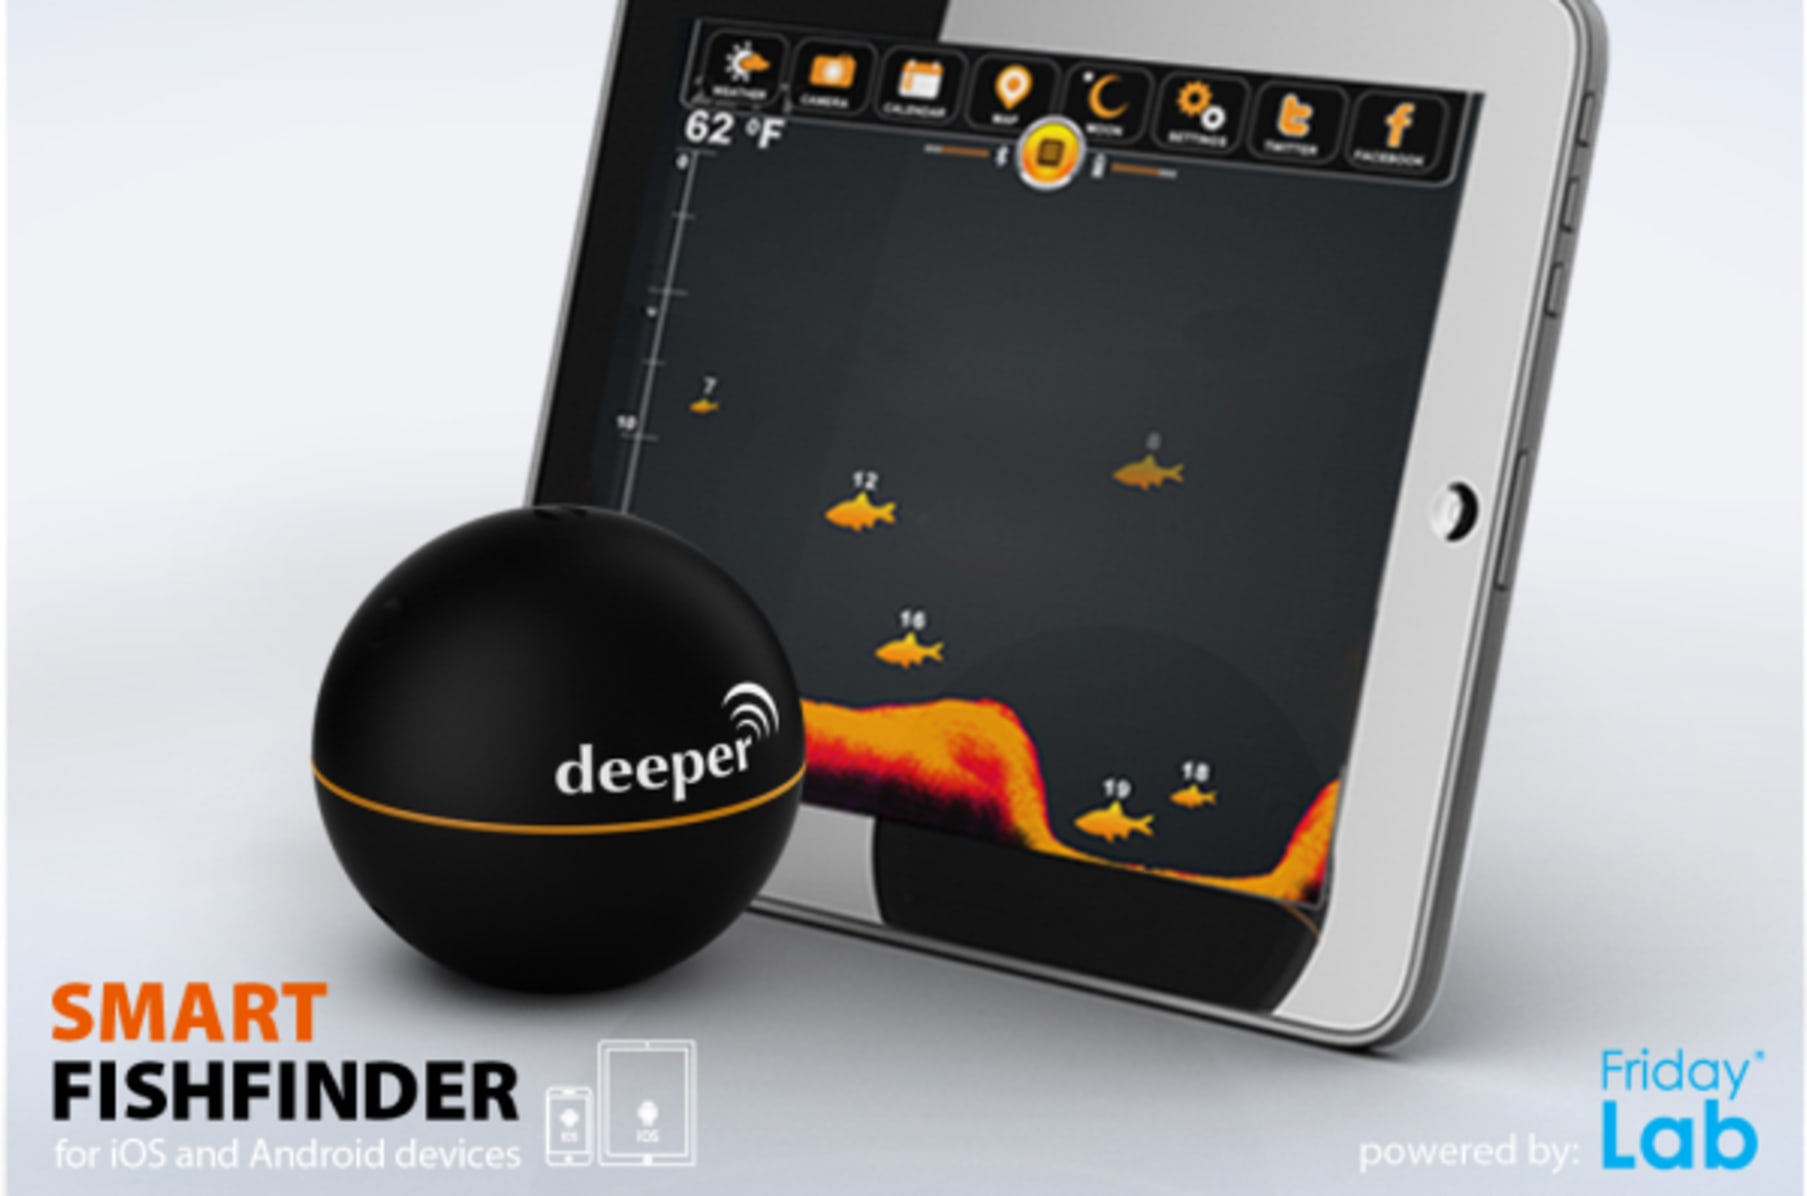 Deeper - Fishfinder for iOS and Android devices